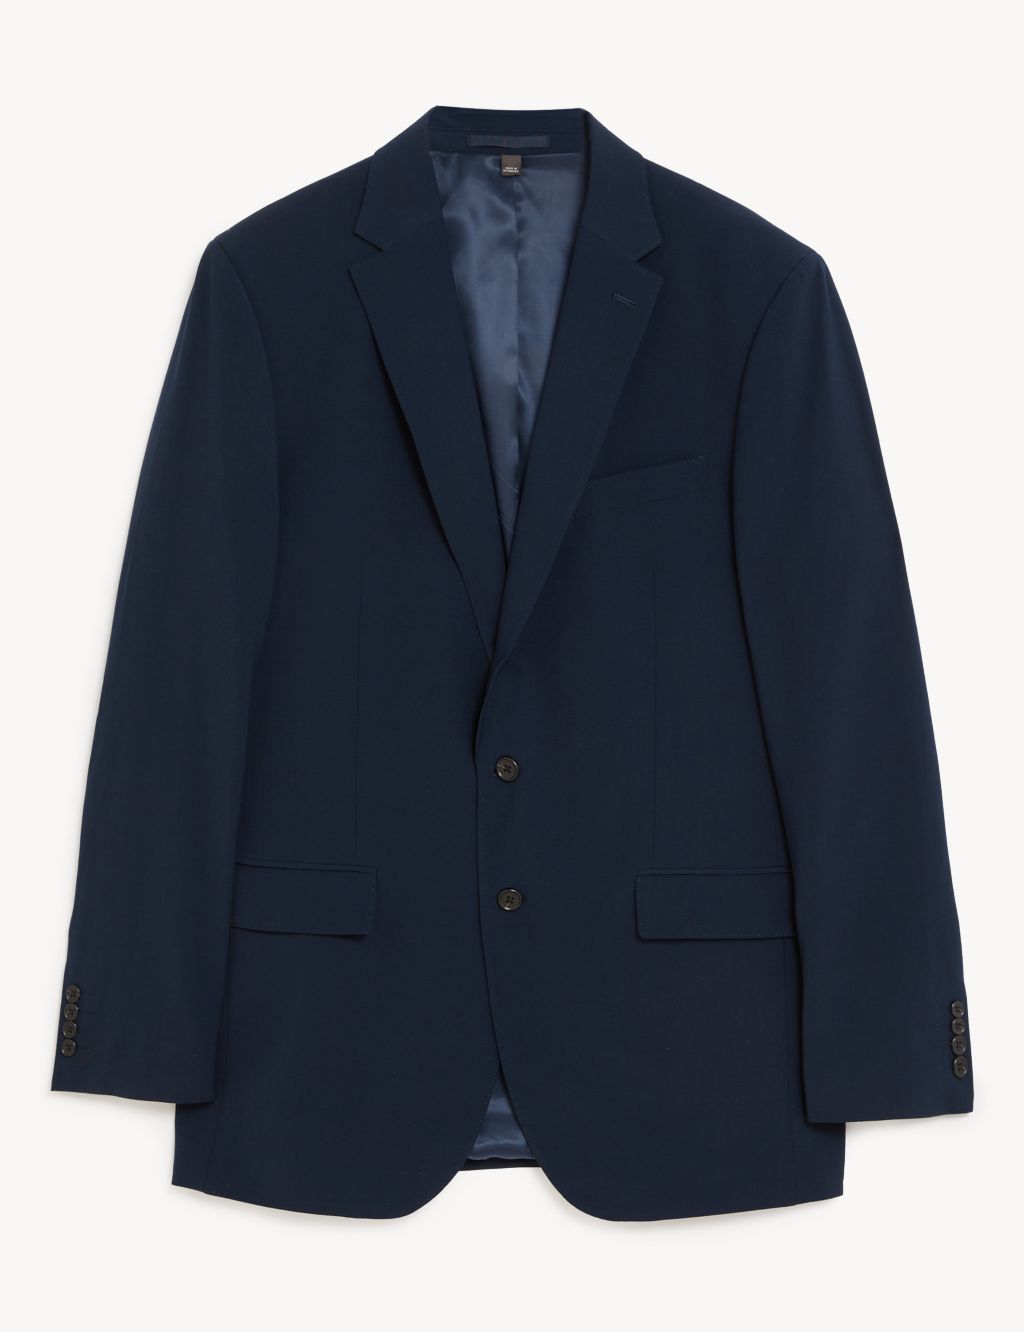 The Ultimate Tailored Fit Suit Jacket image 1